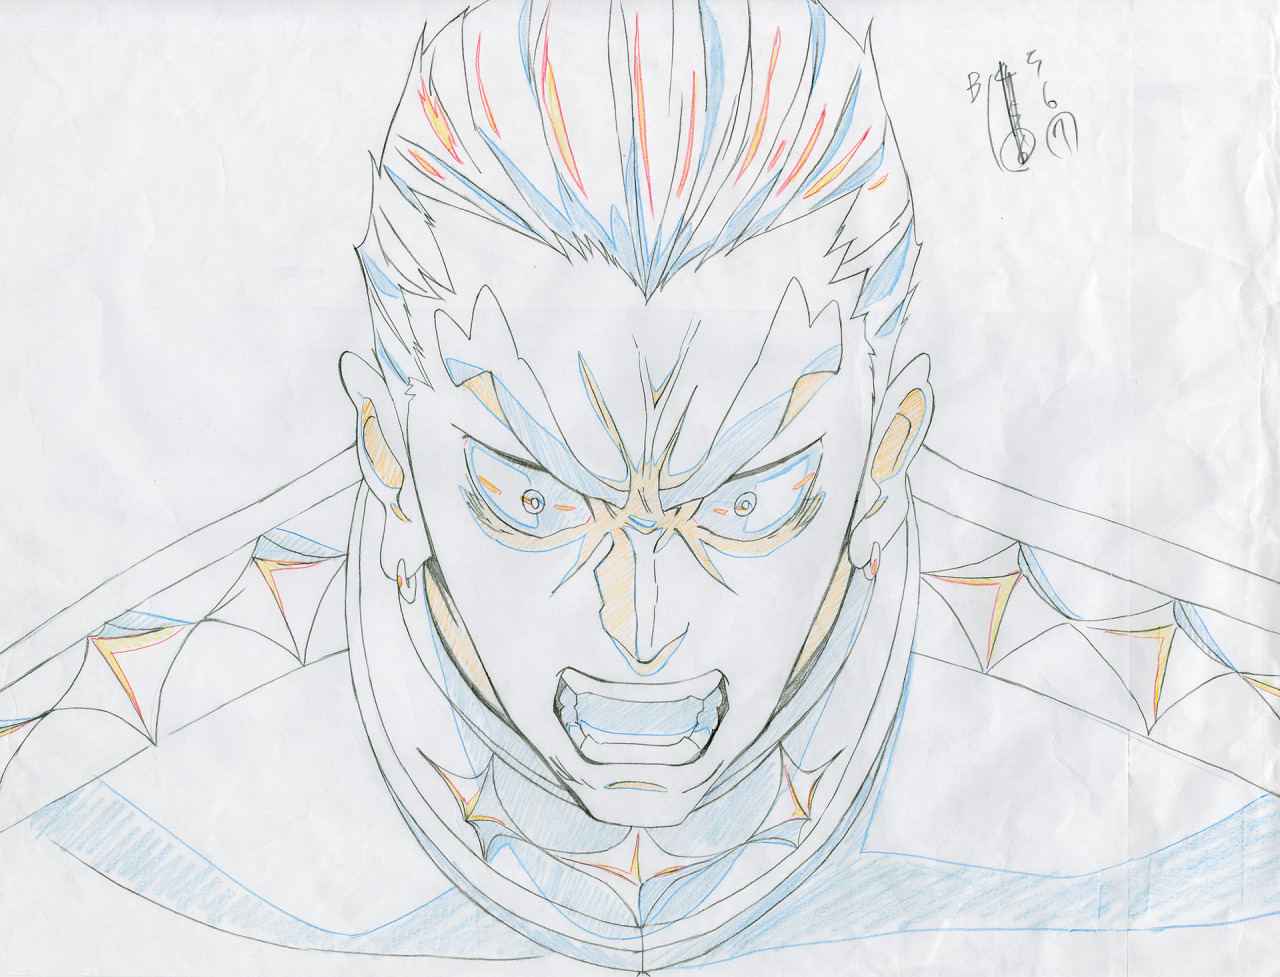  Kill La Kill Production Art   Oh ho, this is quite nice as we get an idea of some